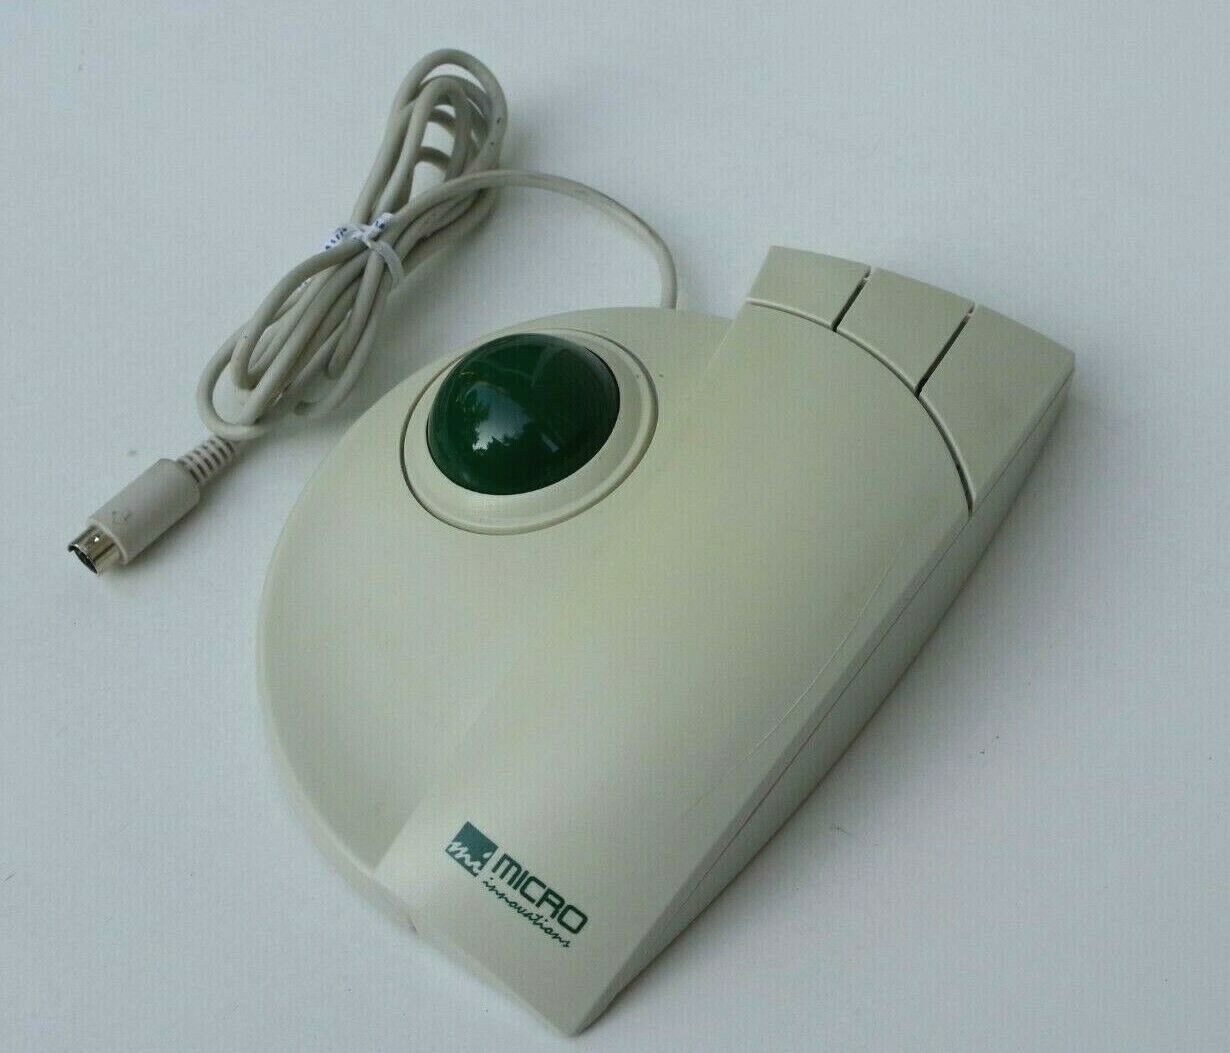 MICRO Innovations STK-3000 WEB Track Trackball Wired PS2 Mouse Tested